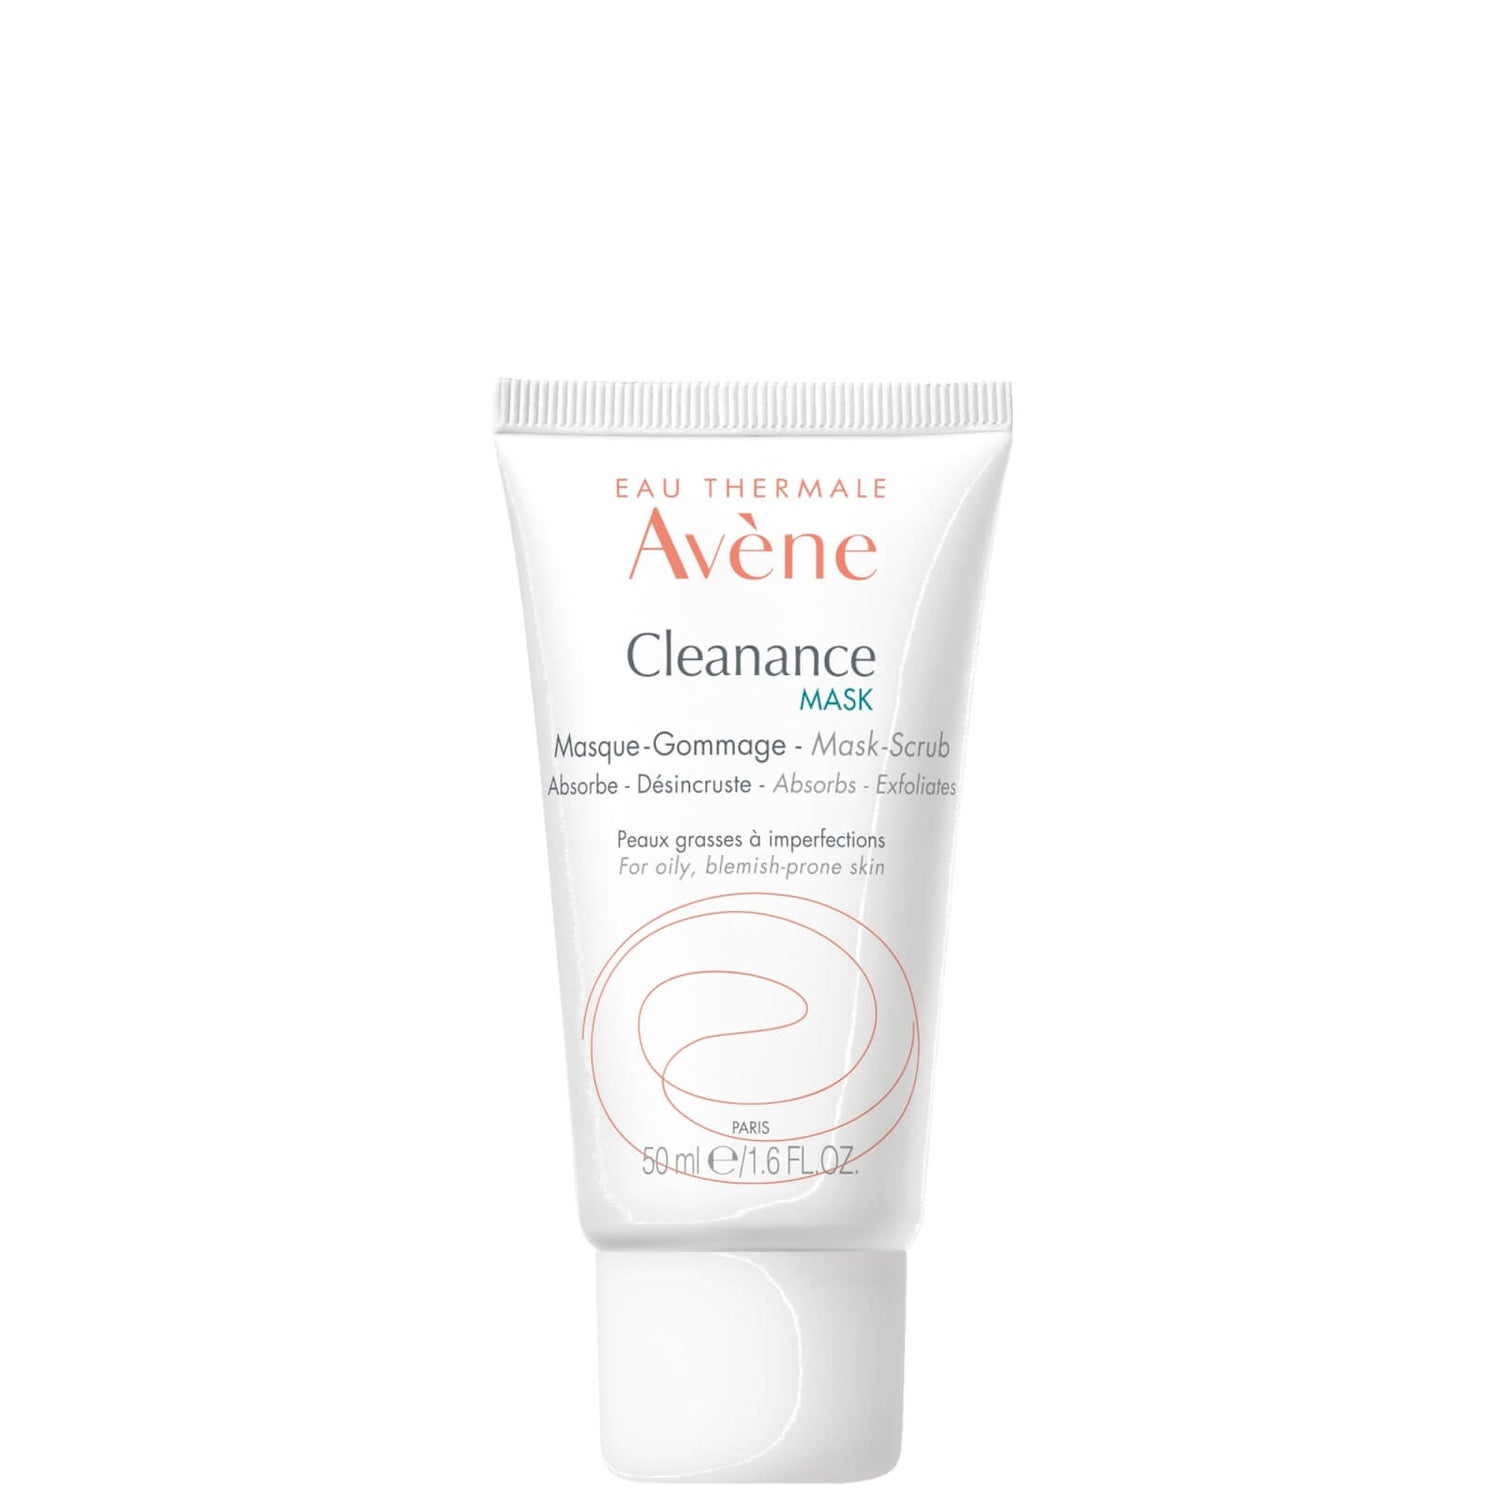 Avène Cleanance Mask for Oily, Blemish-Prone Skin 50ml